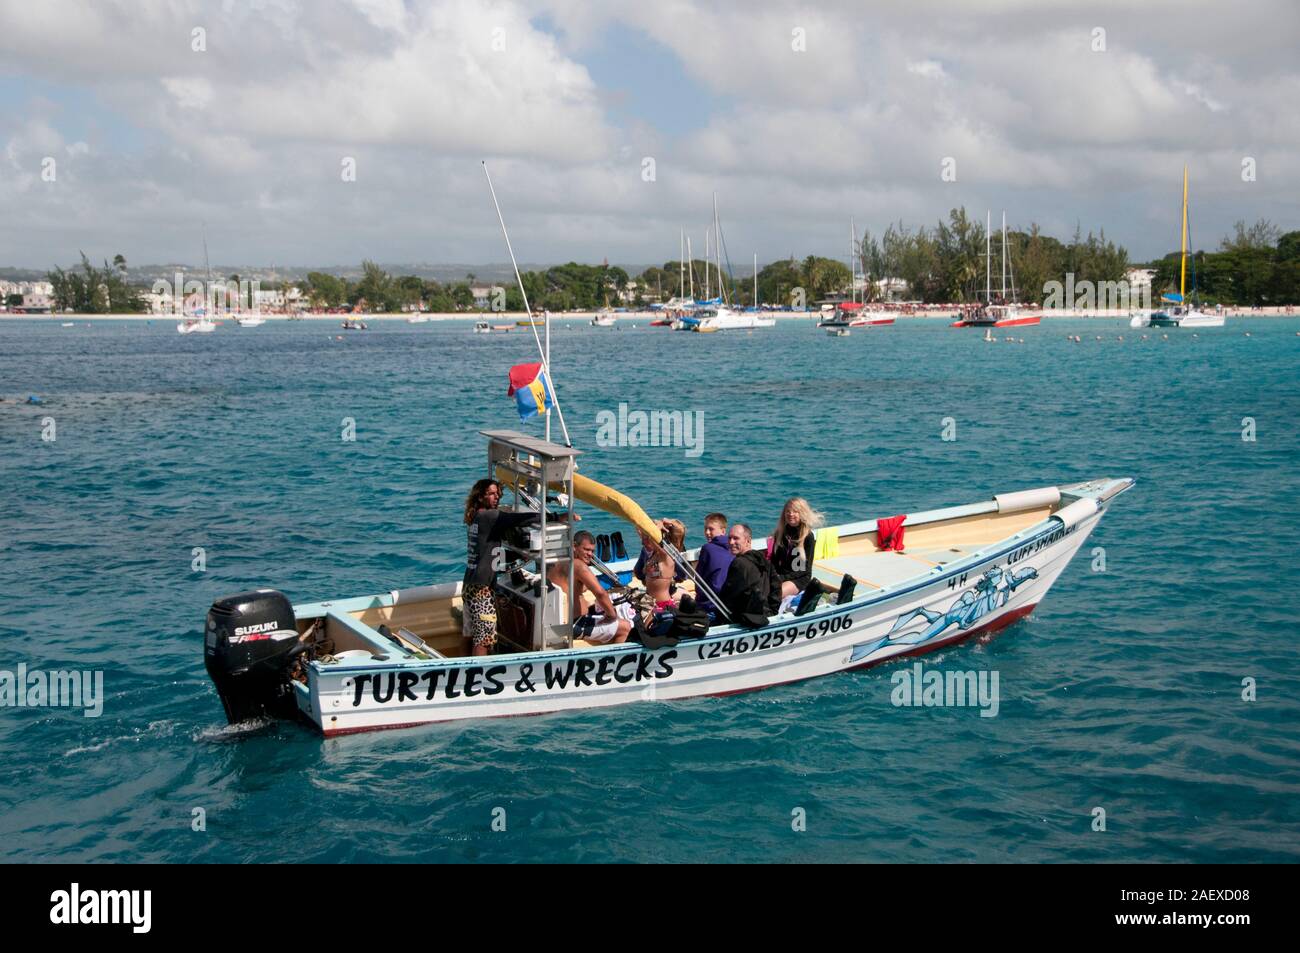 Cliff Sharker boat in Barbados in the Caribbean. The small boat undertakes Turtles and wreck tours in the sea off Barbados. Stock Photo